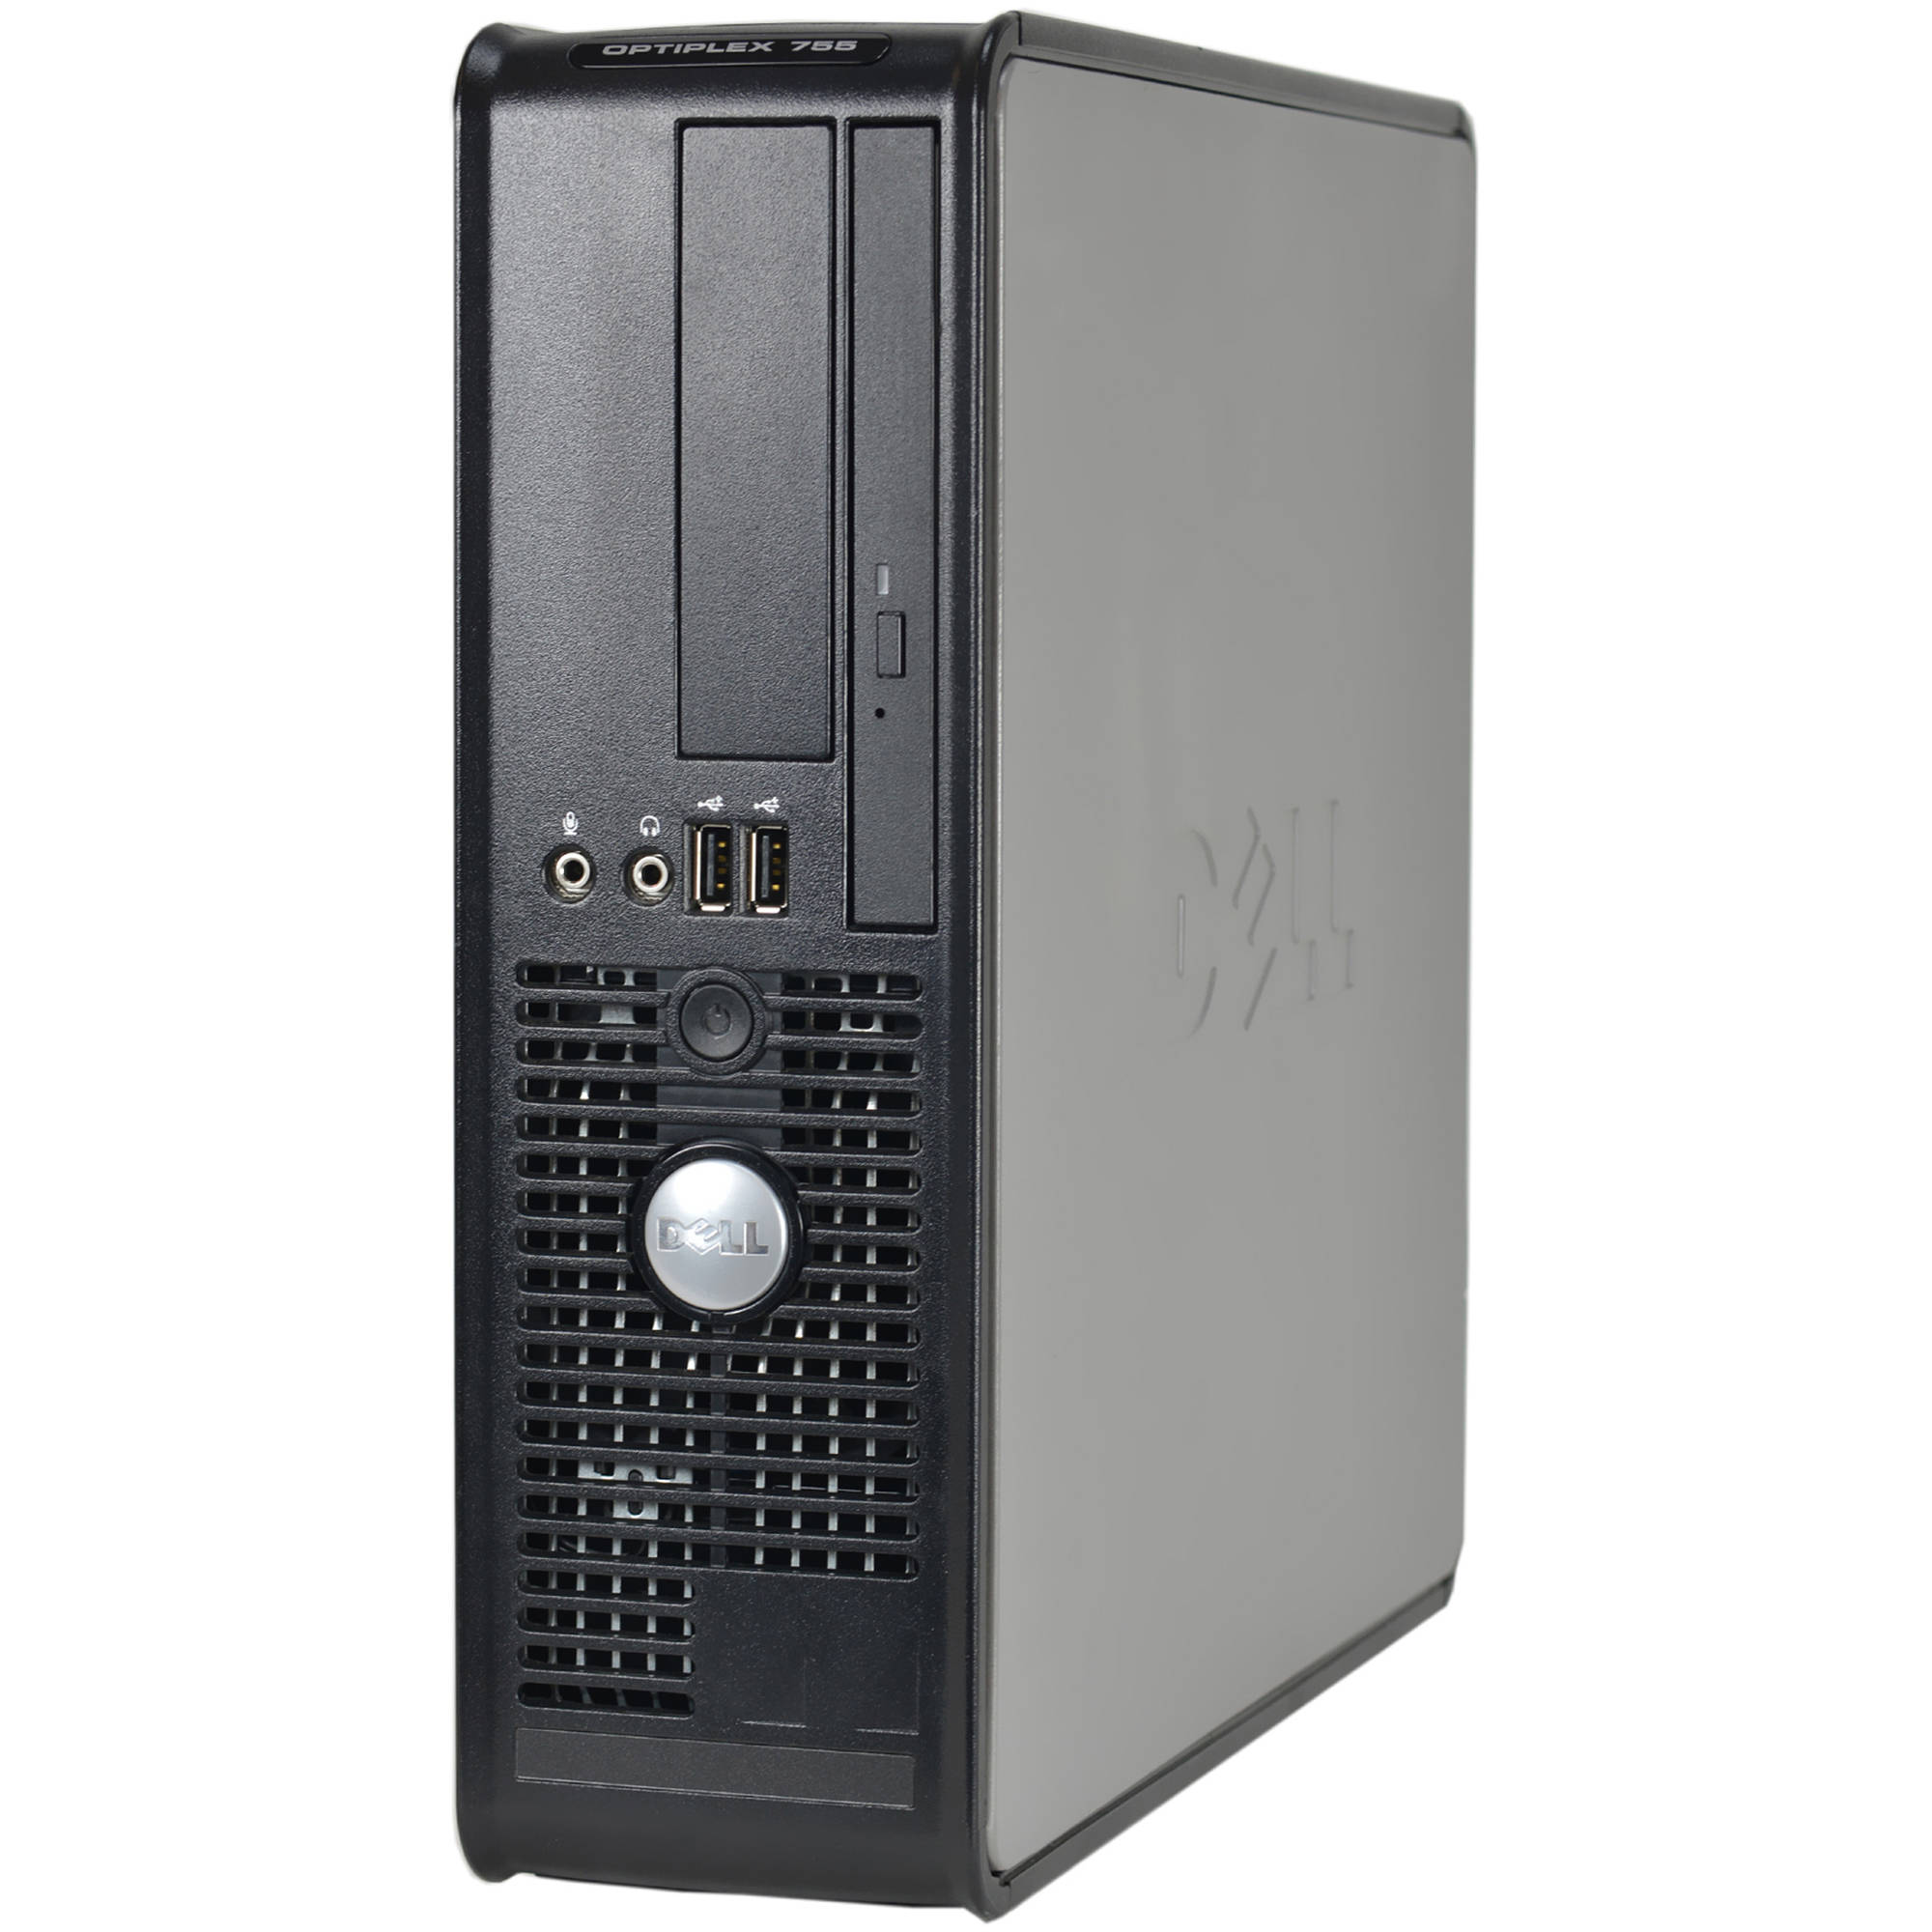 Restored Dell Small Form Factor Desktop PC with Intel Core 2 Duo Processor, 4GB Memory, 250GB Hard Drive DVD Wi-Fi and Windows 10 Home (Refurbished) - image 5 of 5